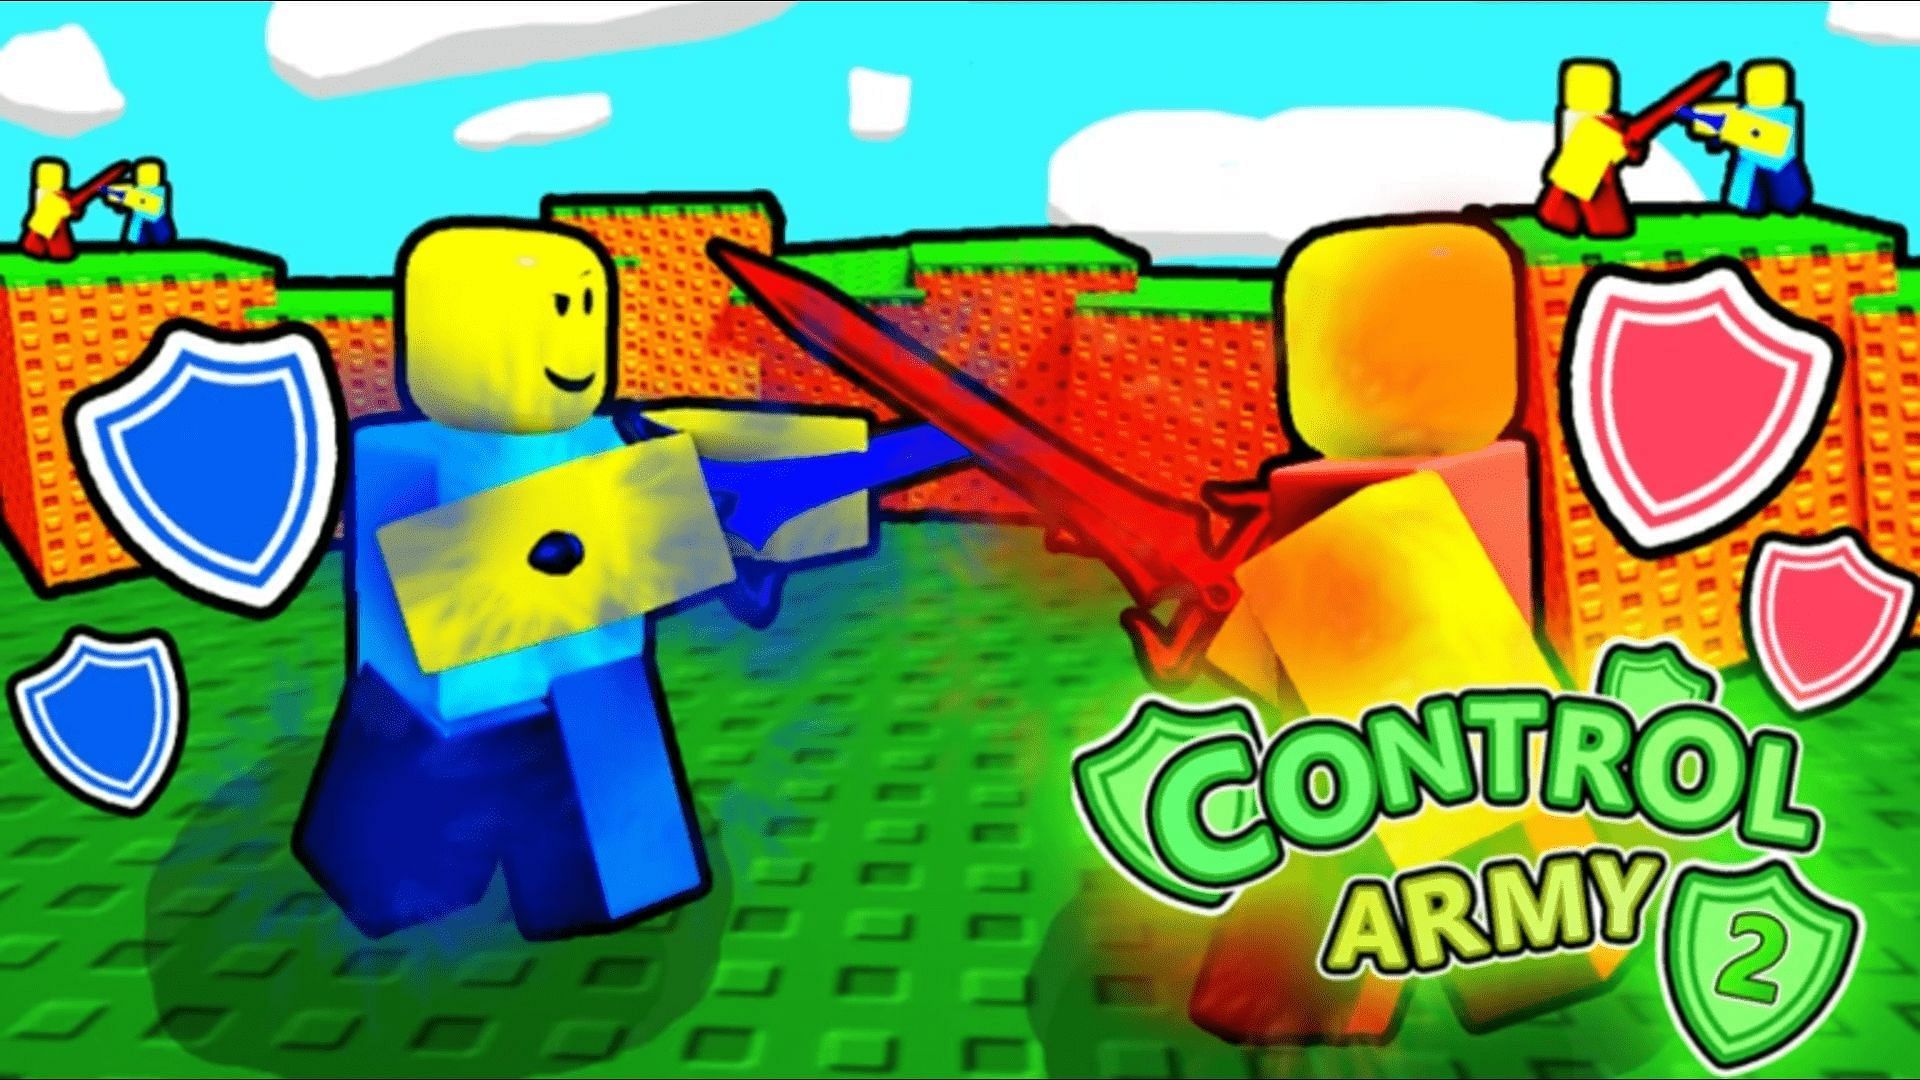 Inactive codes for Control Army 2 (Image via Roblox)